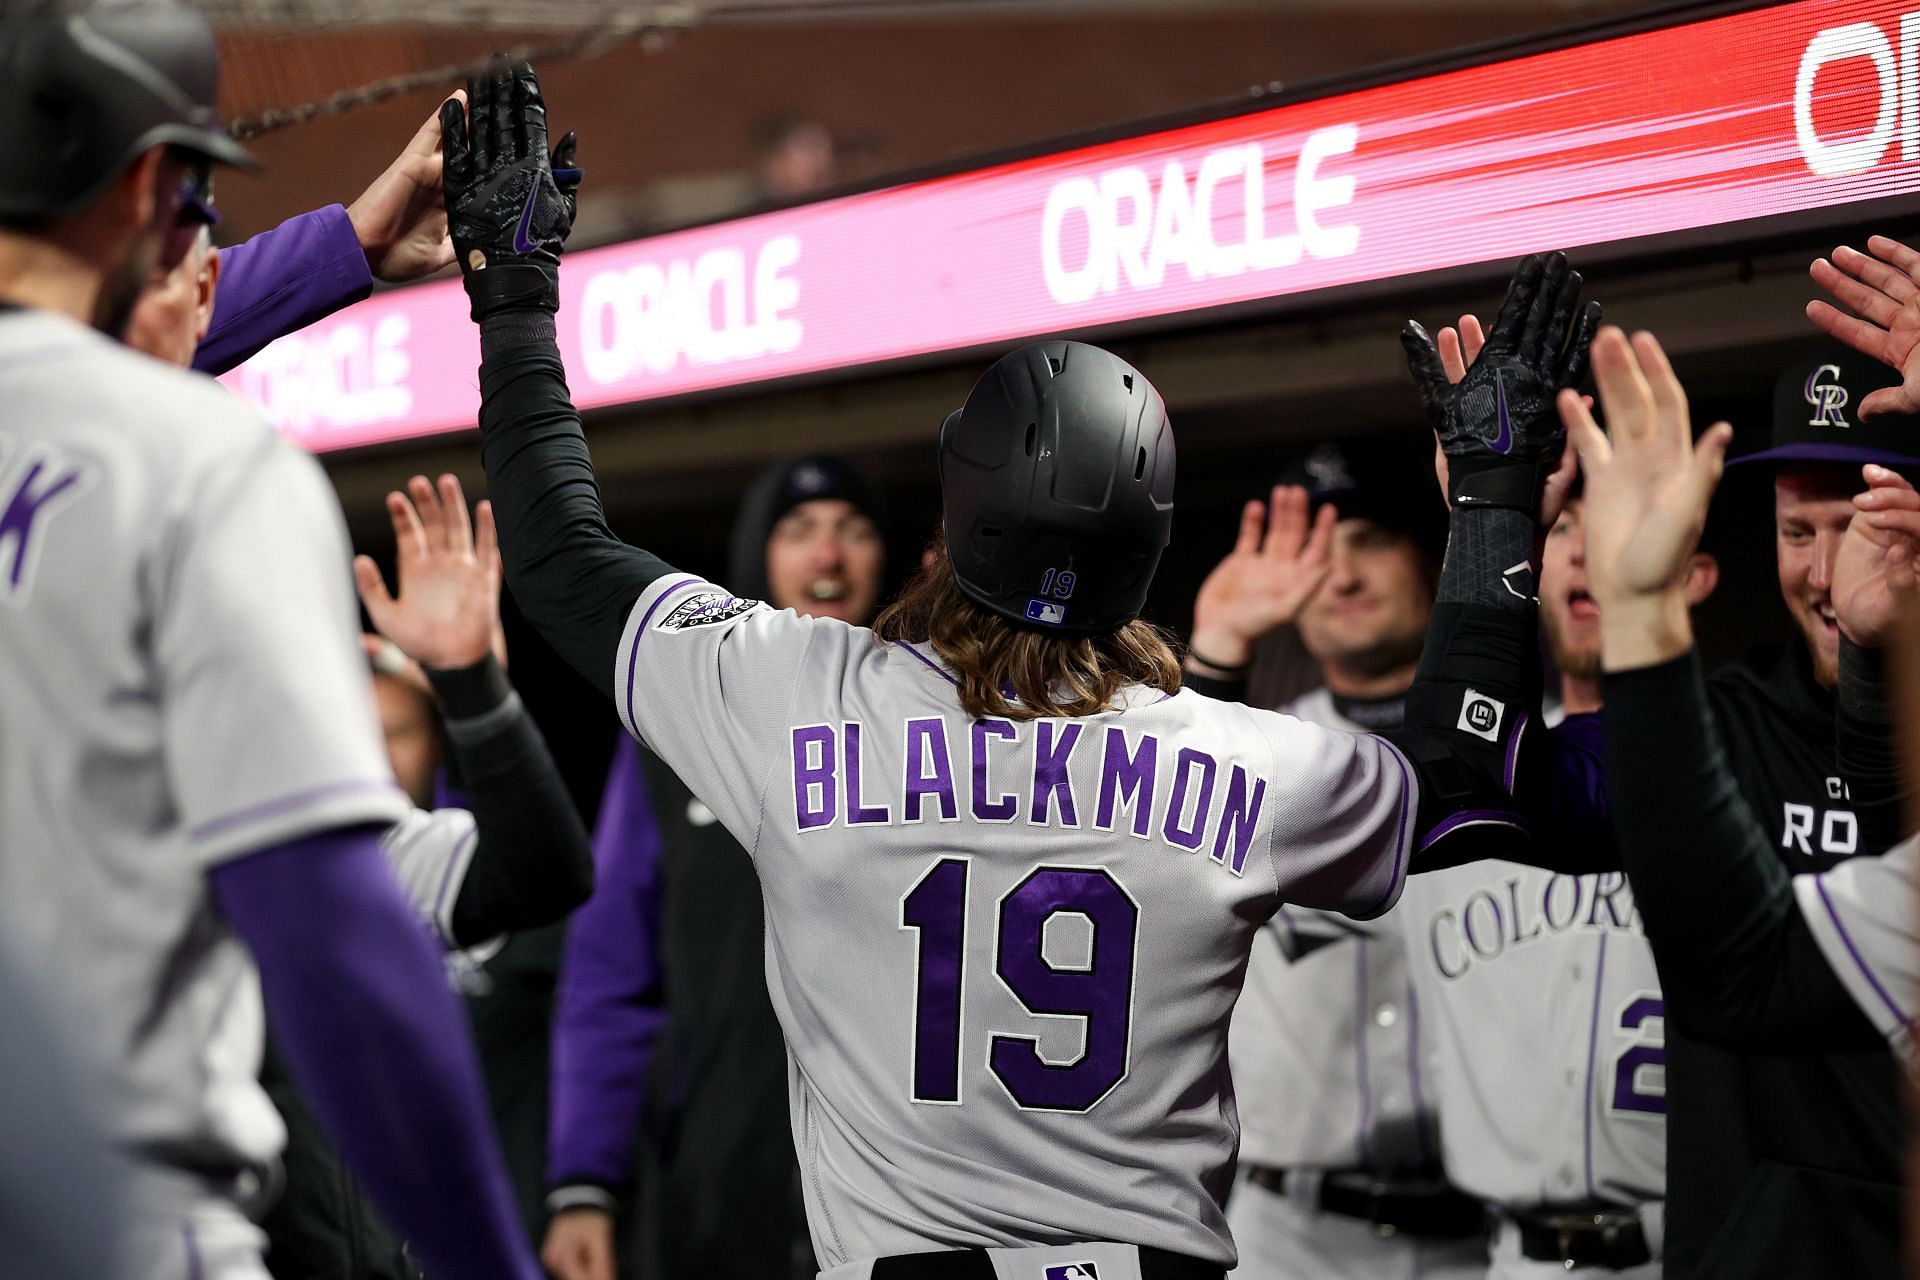 Charlie Blackmon celebrates in the dugout during a Colorado Rockies v San Francisco Giants game.